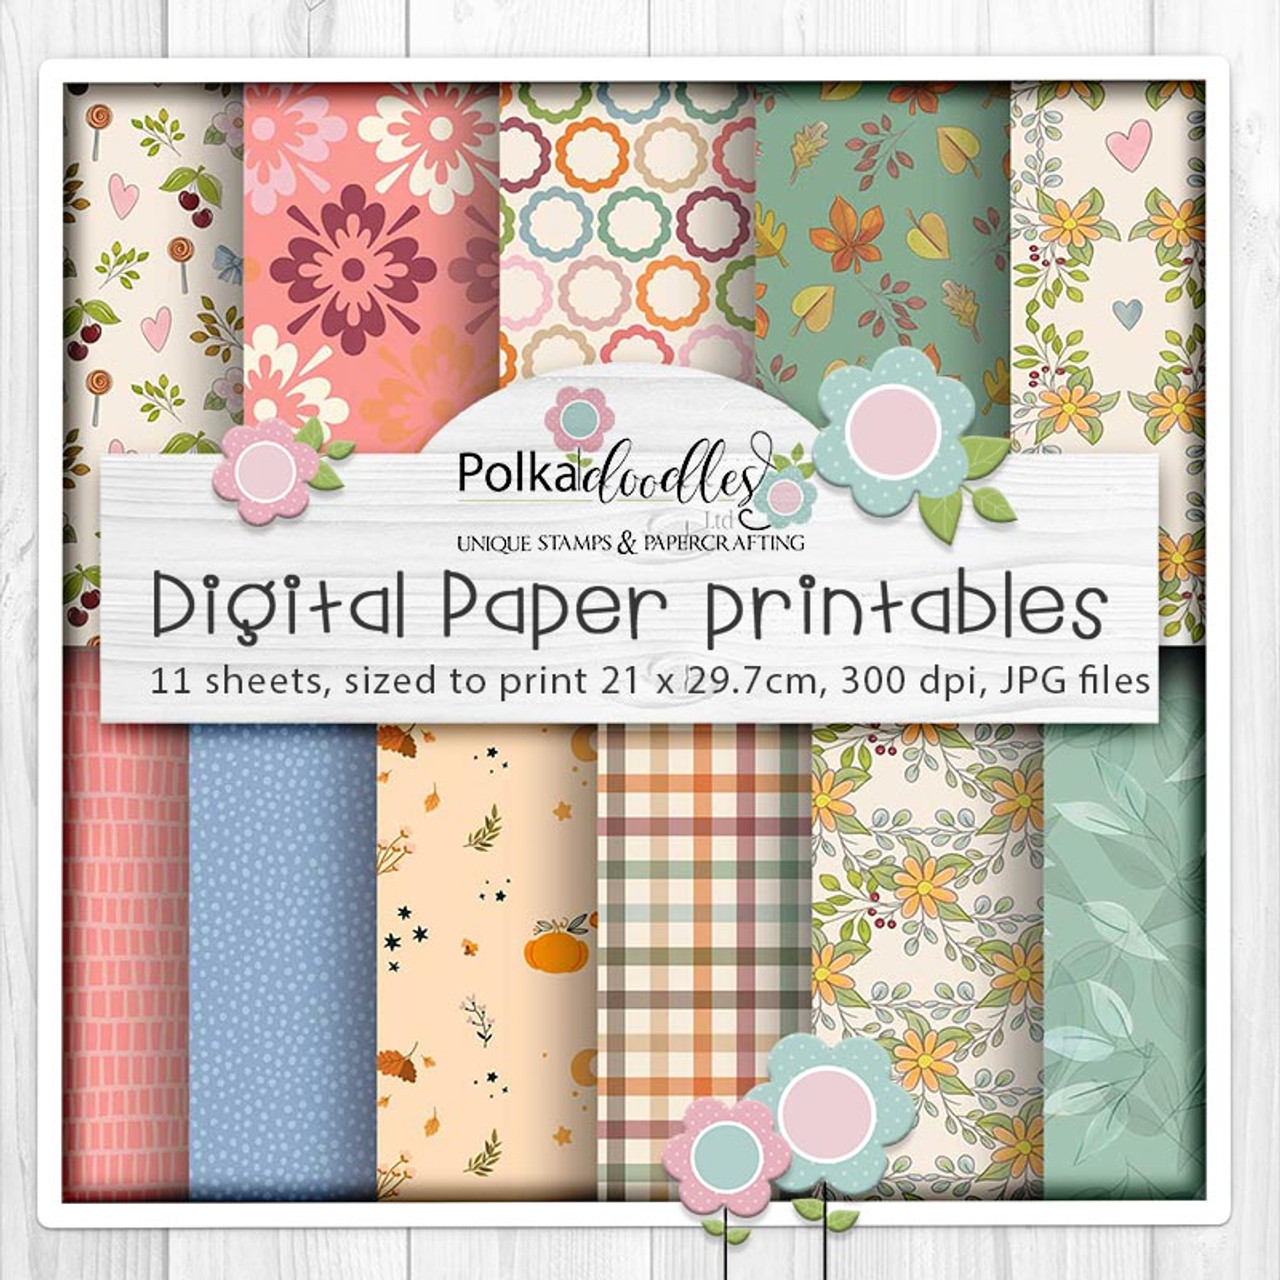 Stamps, Stencils and Craft Supplies - CLEARANCE - HUGE CLEARANCE SAVINGS -  Polkadoodles card making craft scrapbooking stamps and digital stamp  printables